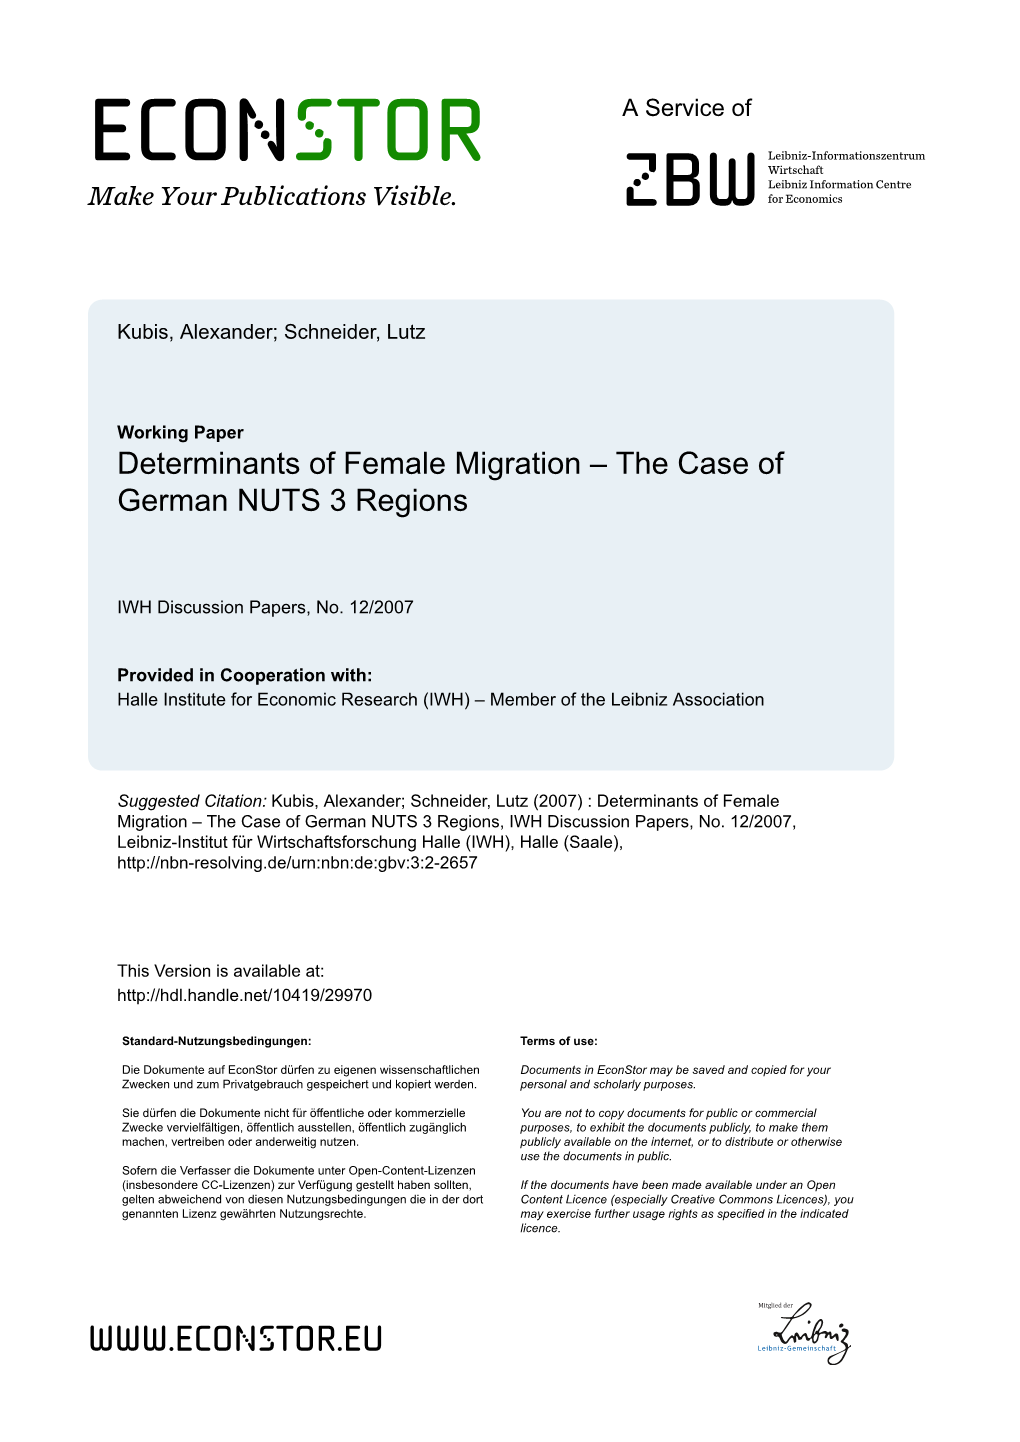 Determinants of Female Migration – the Case of German NUTS 3 Regions